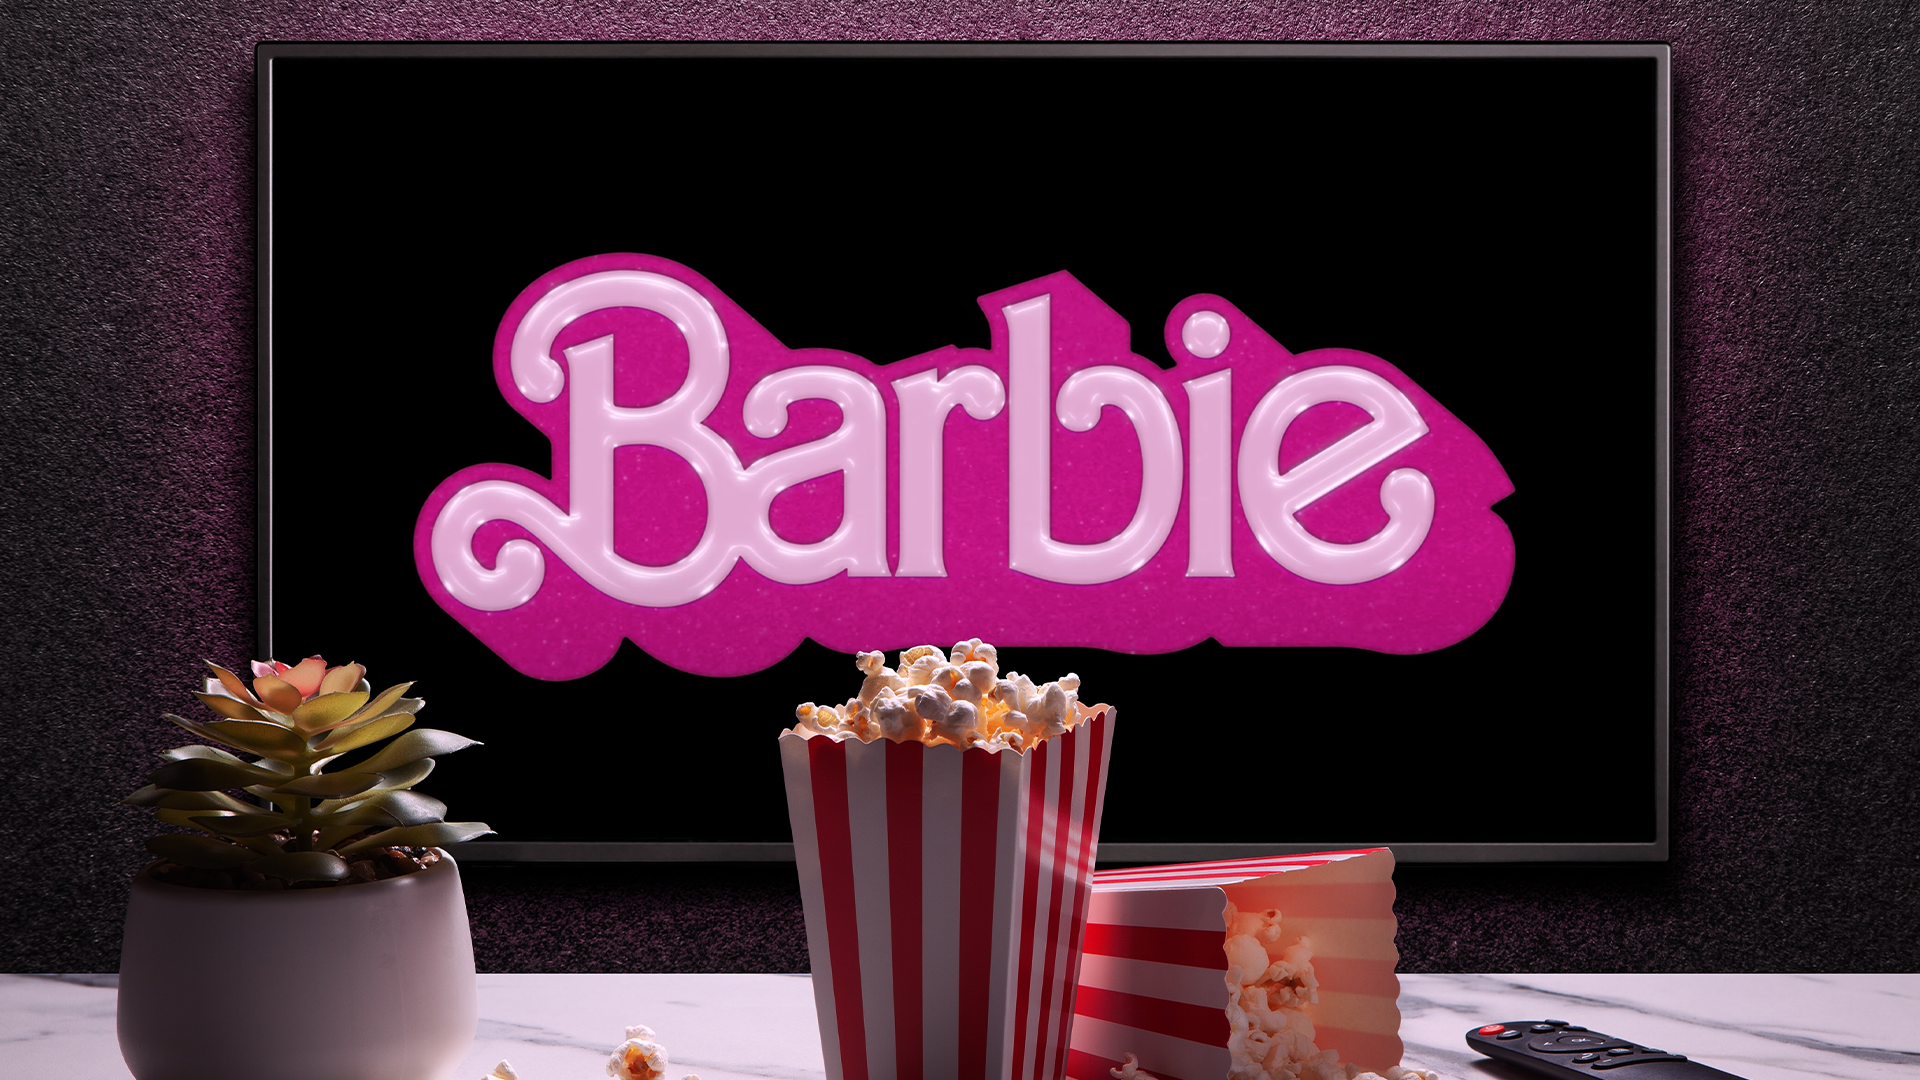 A screen showing Barbie and popcorn